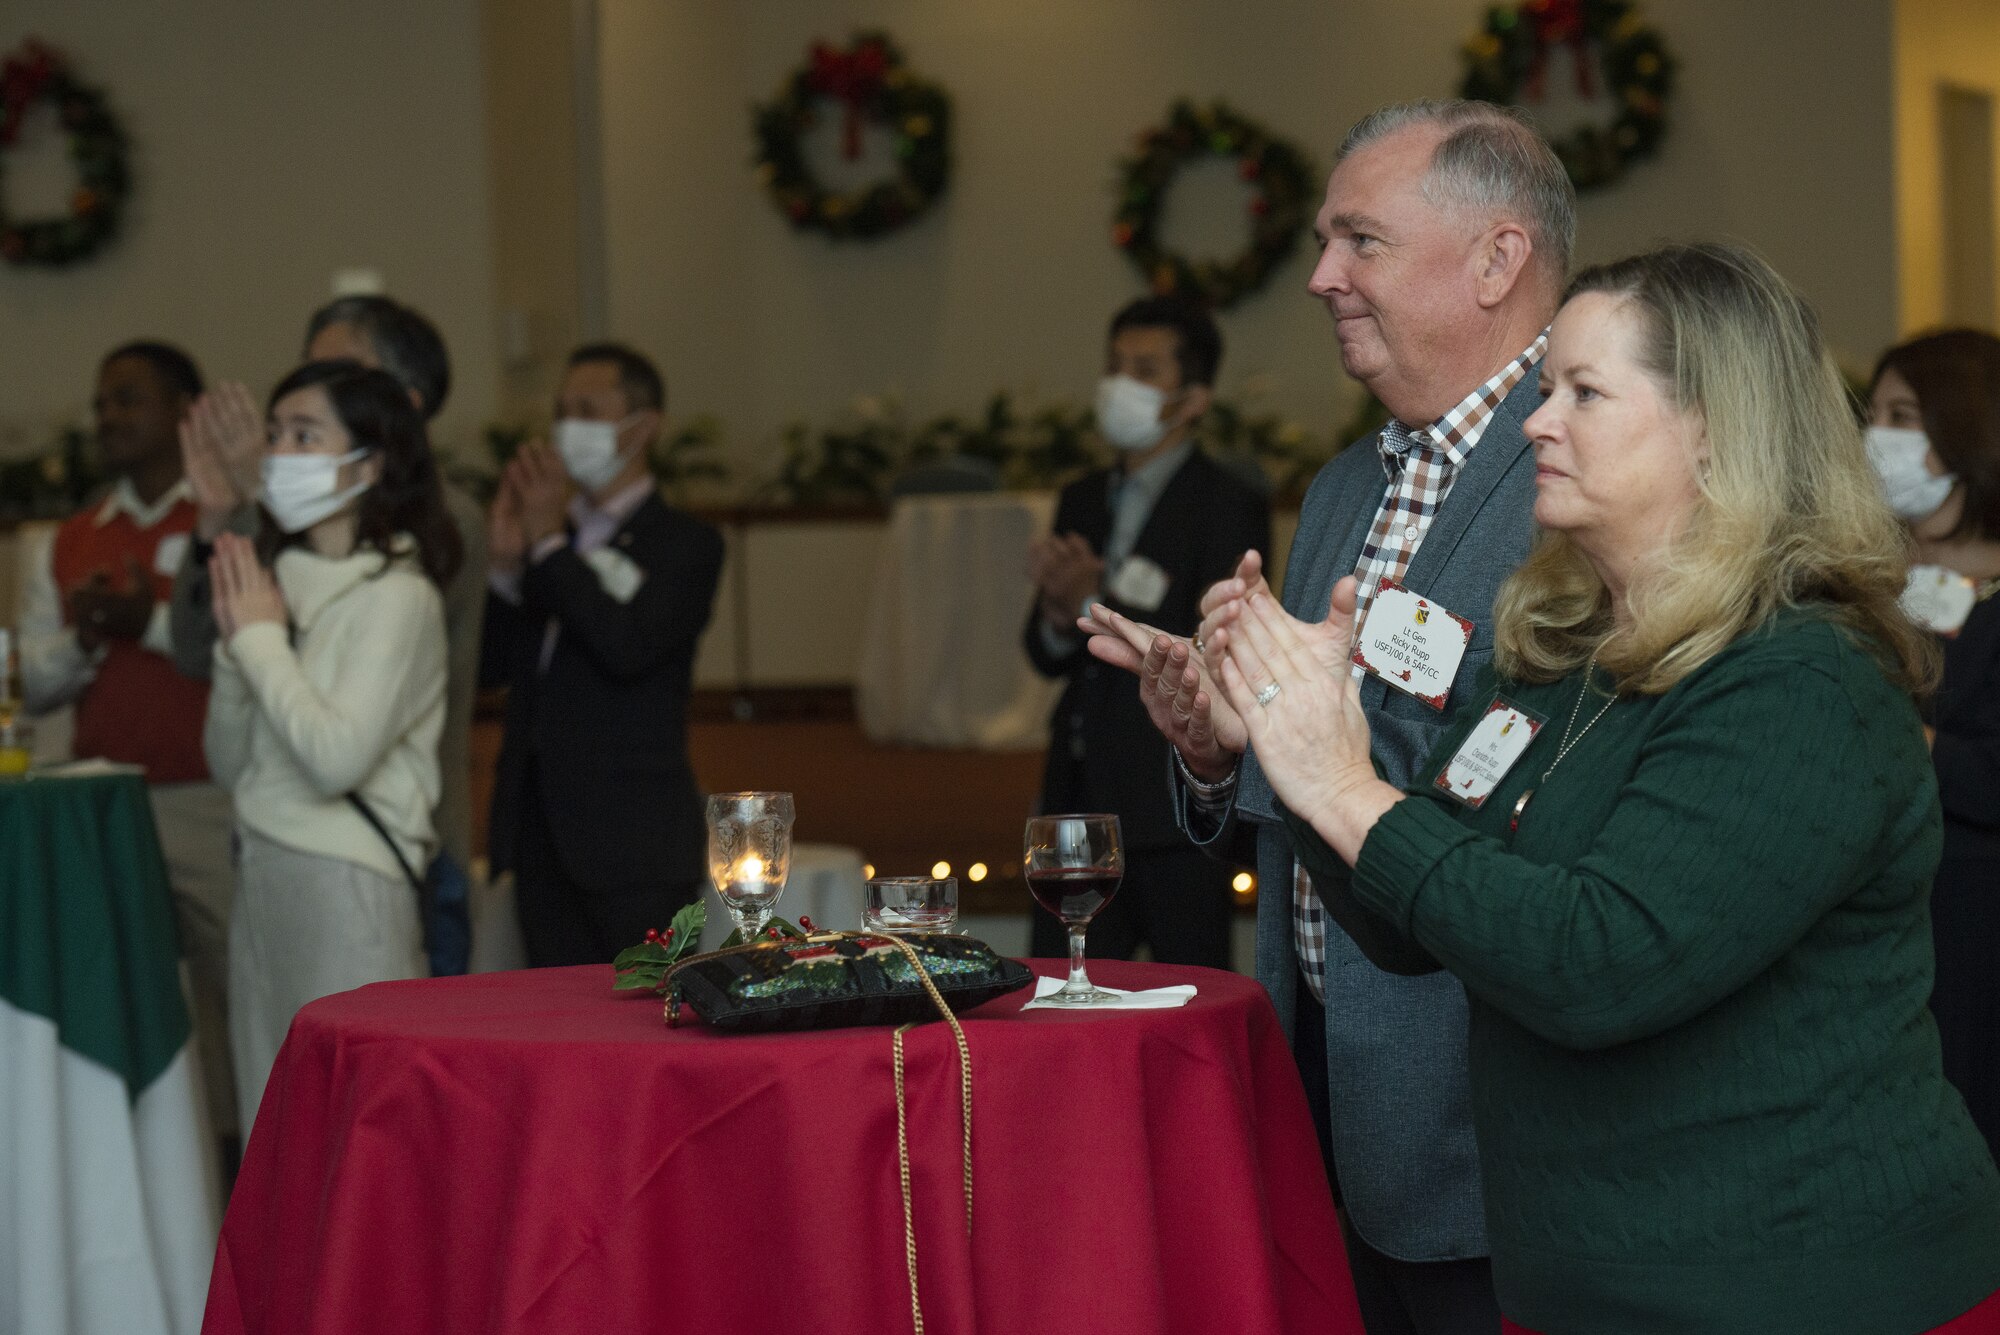 Lt. Gen. Ricky Rupp, U.S. Forces Japan and 5th Air Force commander, and his wife Charlotte Rupp, give a round of applause at the end of a Yokota High School musical performance during the 374th AW Holiday Social at the Yokota Officers Club at Yokota Air Base, Japan, Dec. 11, 2021. The event was an opportunity for wing leadership and Japanese partners from the JASDF, Japan America Air Force Goodwill Association, friendship clubs, and Government of Japan, to celebrate the holiday season together. Attendees were able to strengthen their relationships while enjoying live music performed by the Yokota High School and a children’s ballet dance. (U.S. Air Force photo by Tech. Sgt. Christopher Hubenthal)